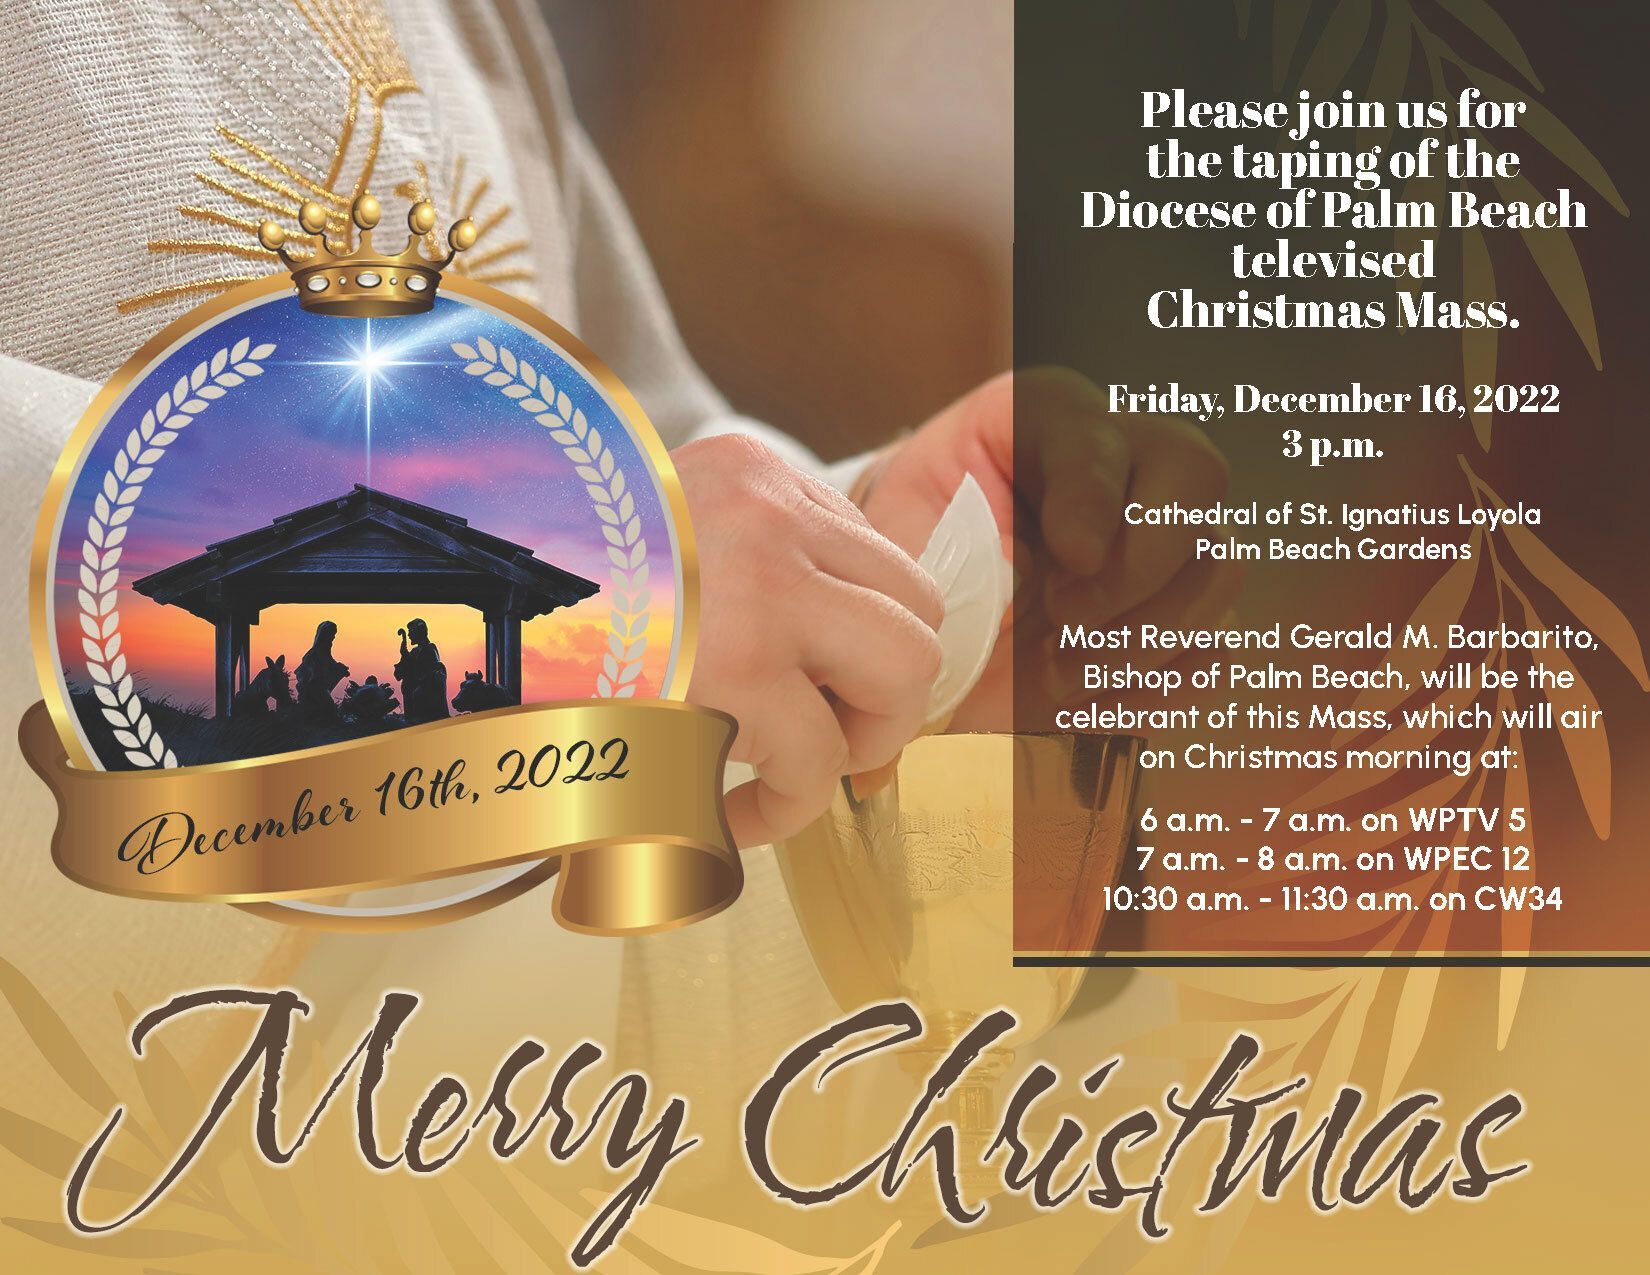 Join us for the taping of the Christmas Mass